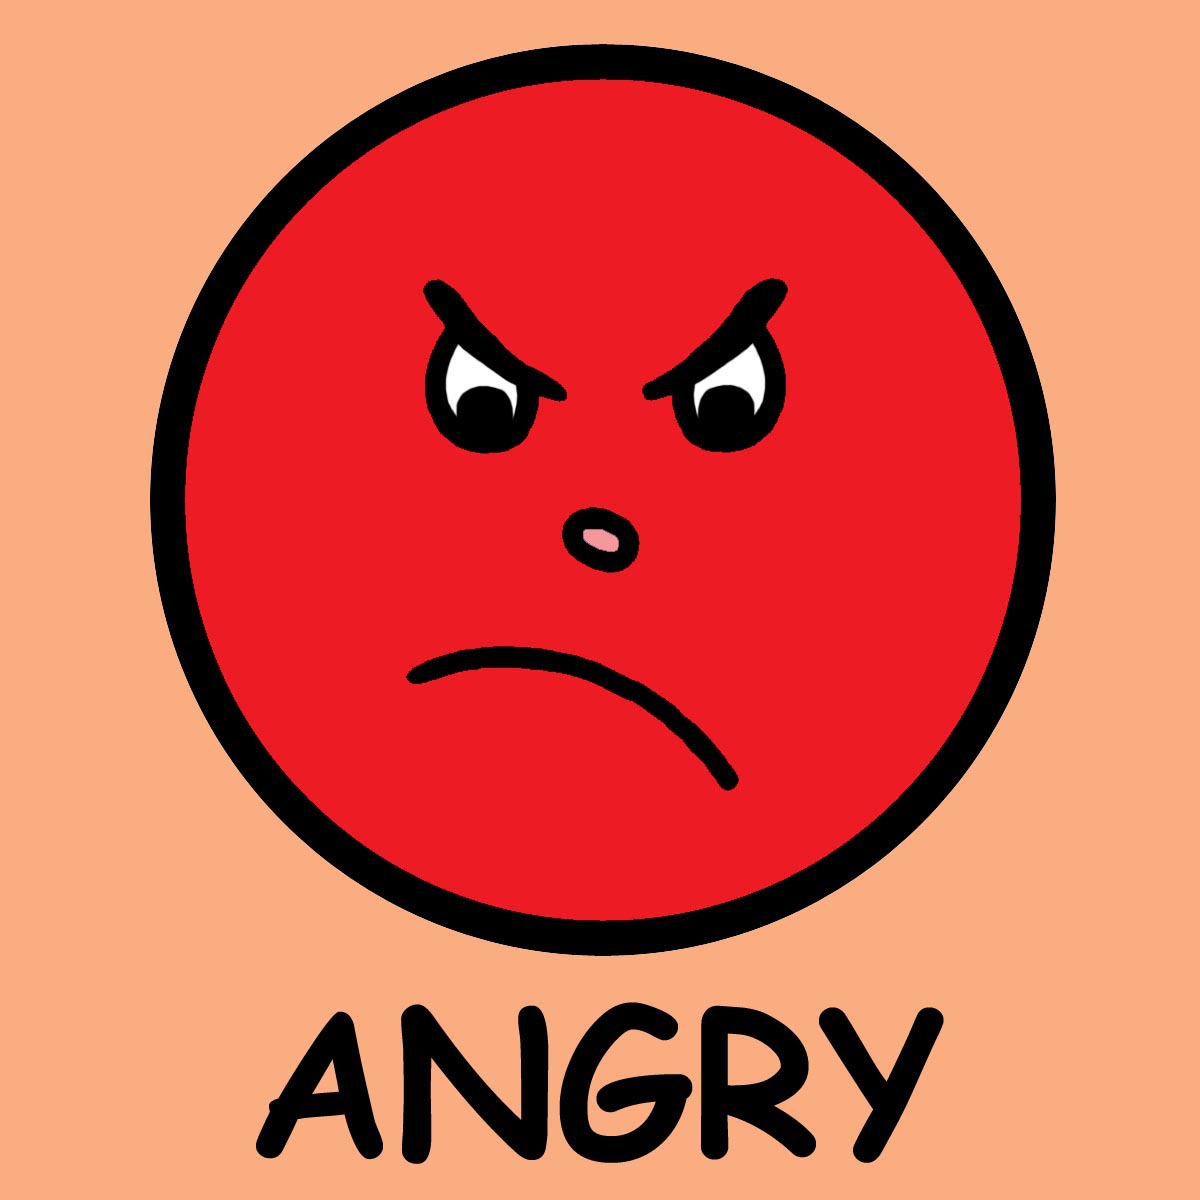 Angry face clipart